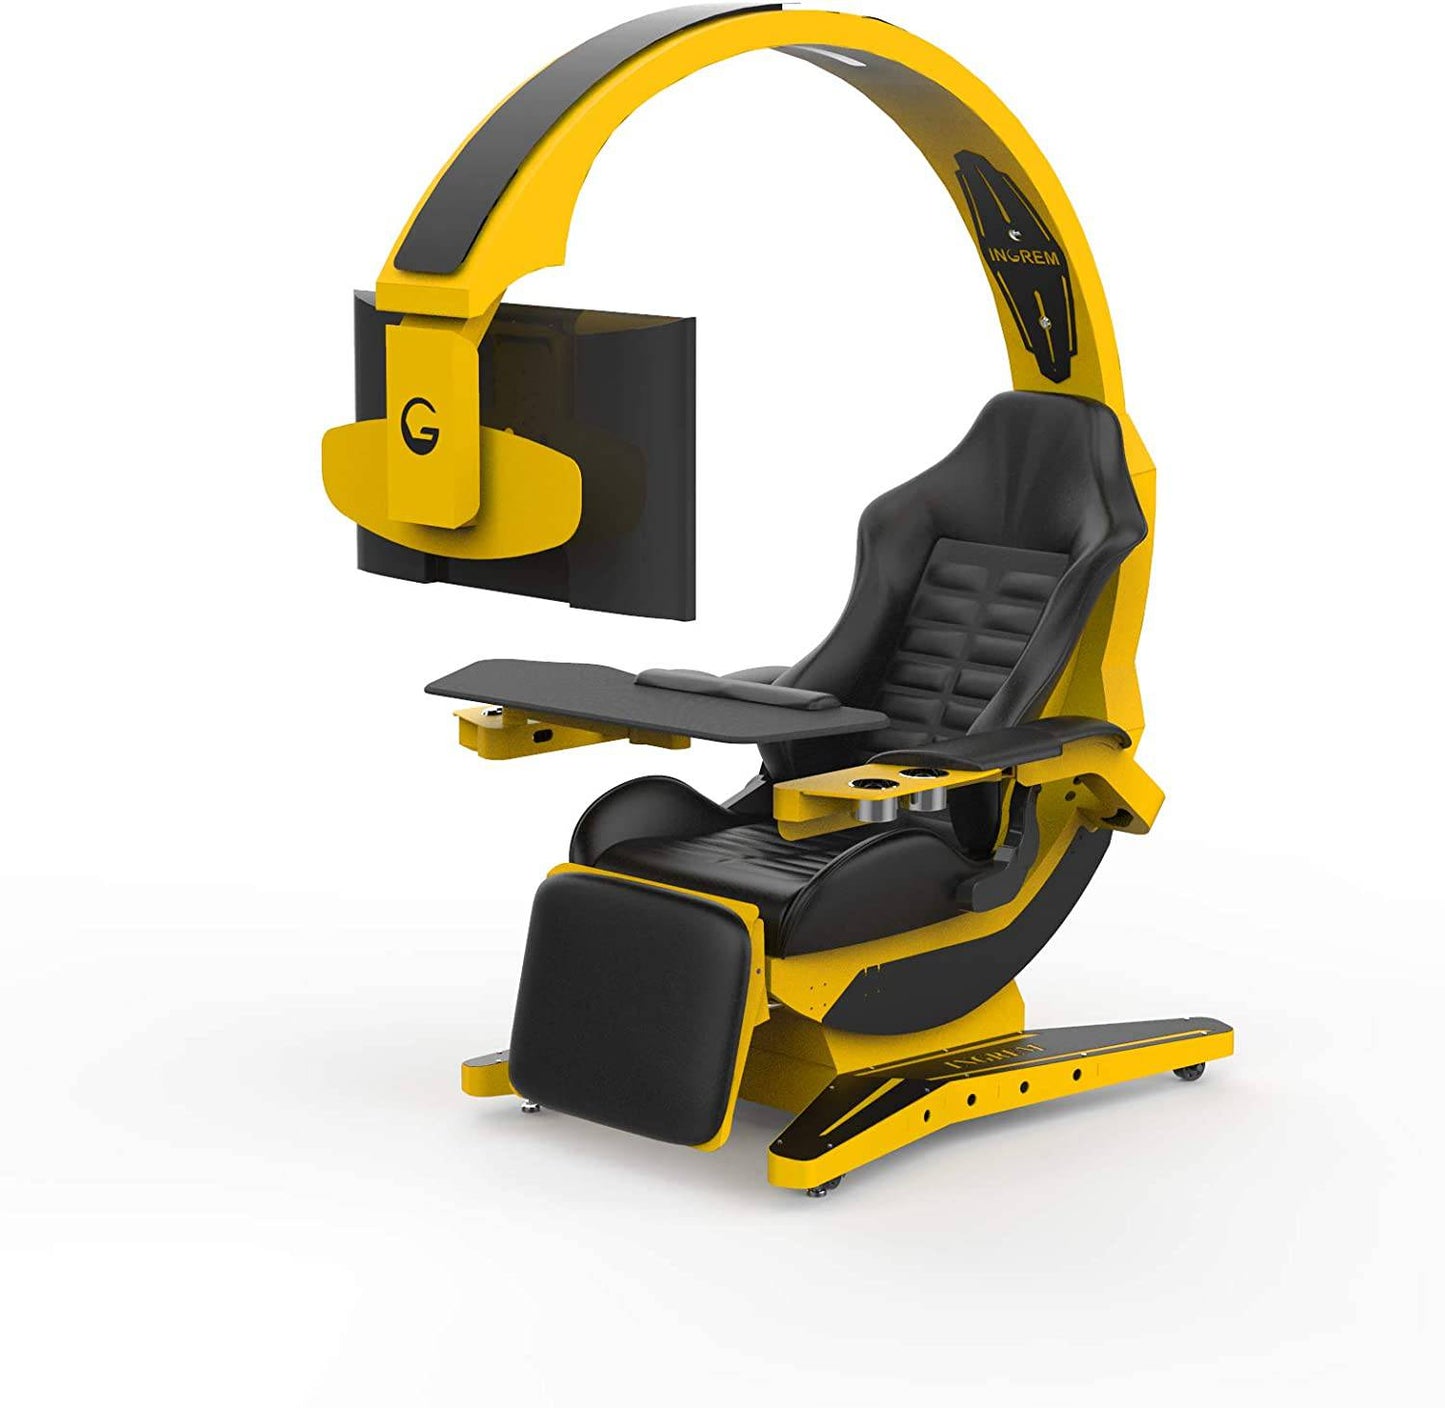 COOLBABY Gaming Station Cabin, Elevate Your Home Gaming Experience with the Ultimate Computer Cockpit and Happy Chair - COOLBABY